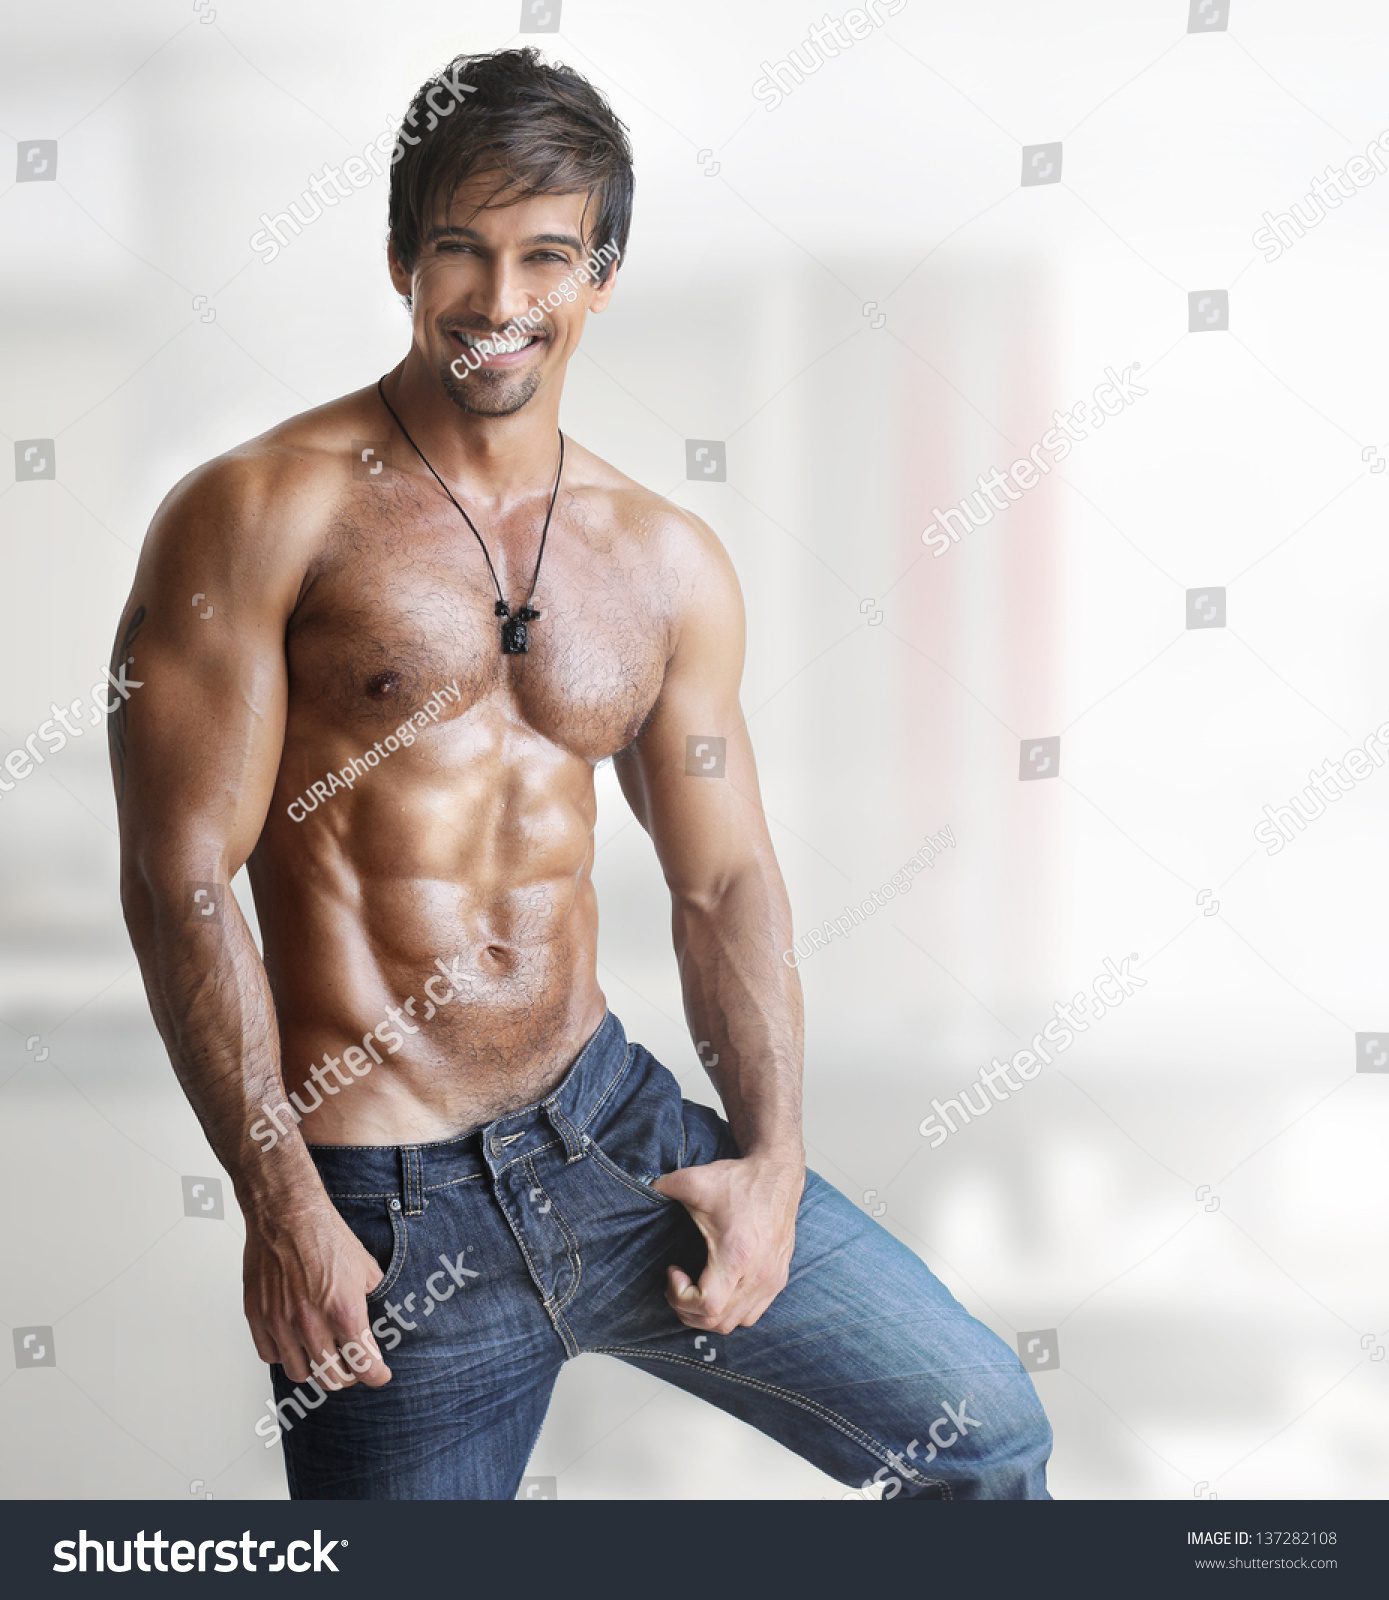 Sexy Smiling Shirtless Male Model Muscular Foto Stok Shutterstock